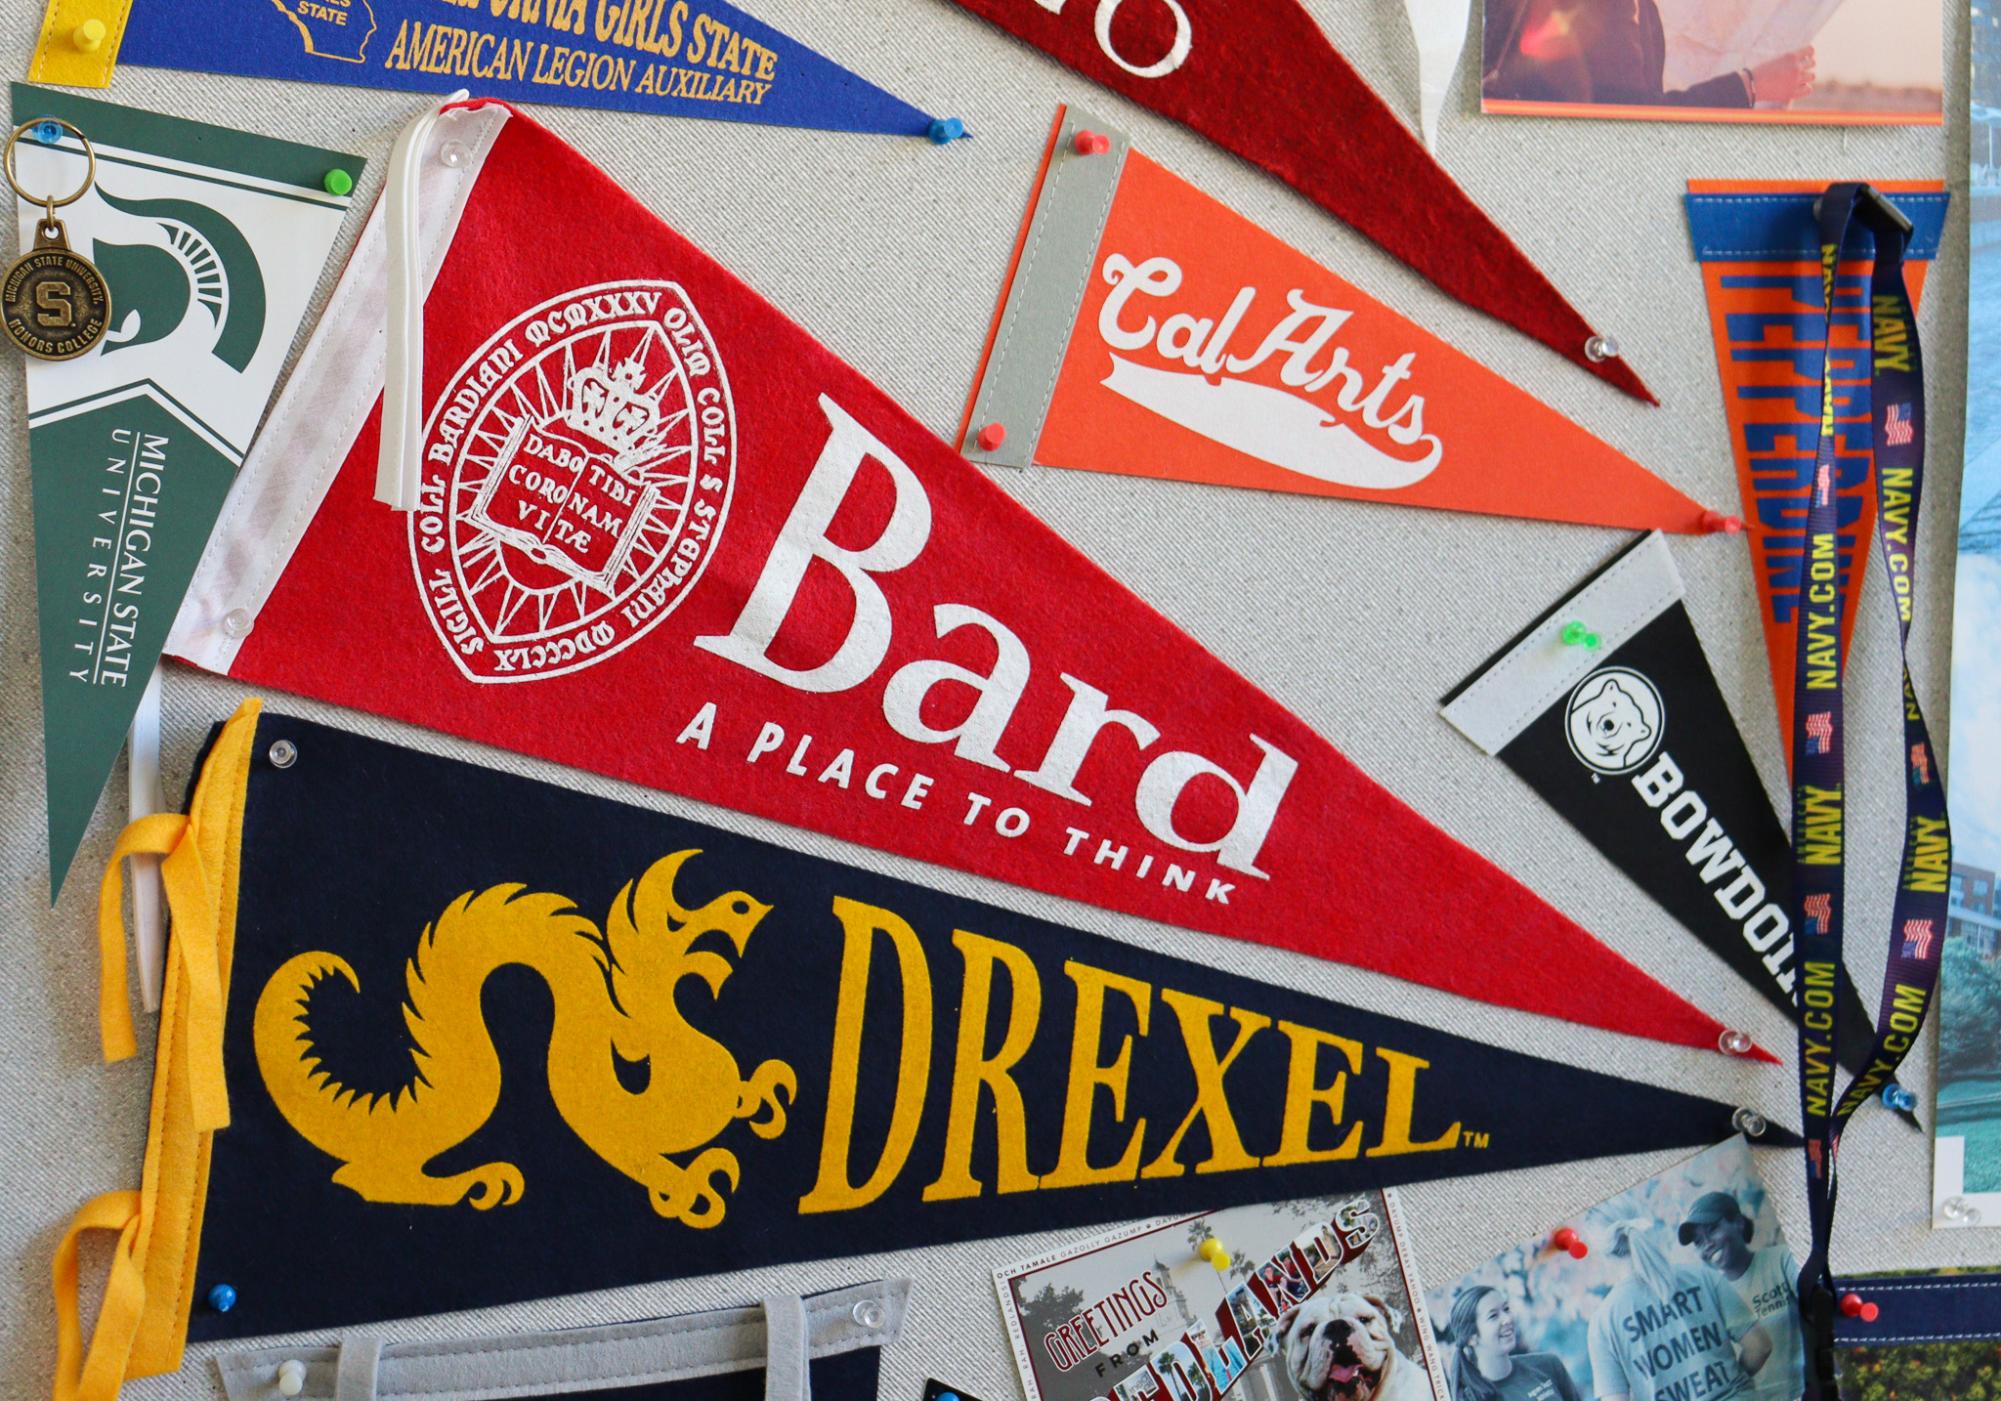 The College and Career Center at Archie Williams displays different college banners.